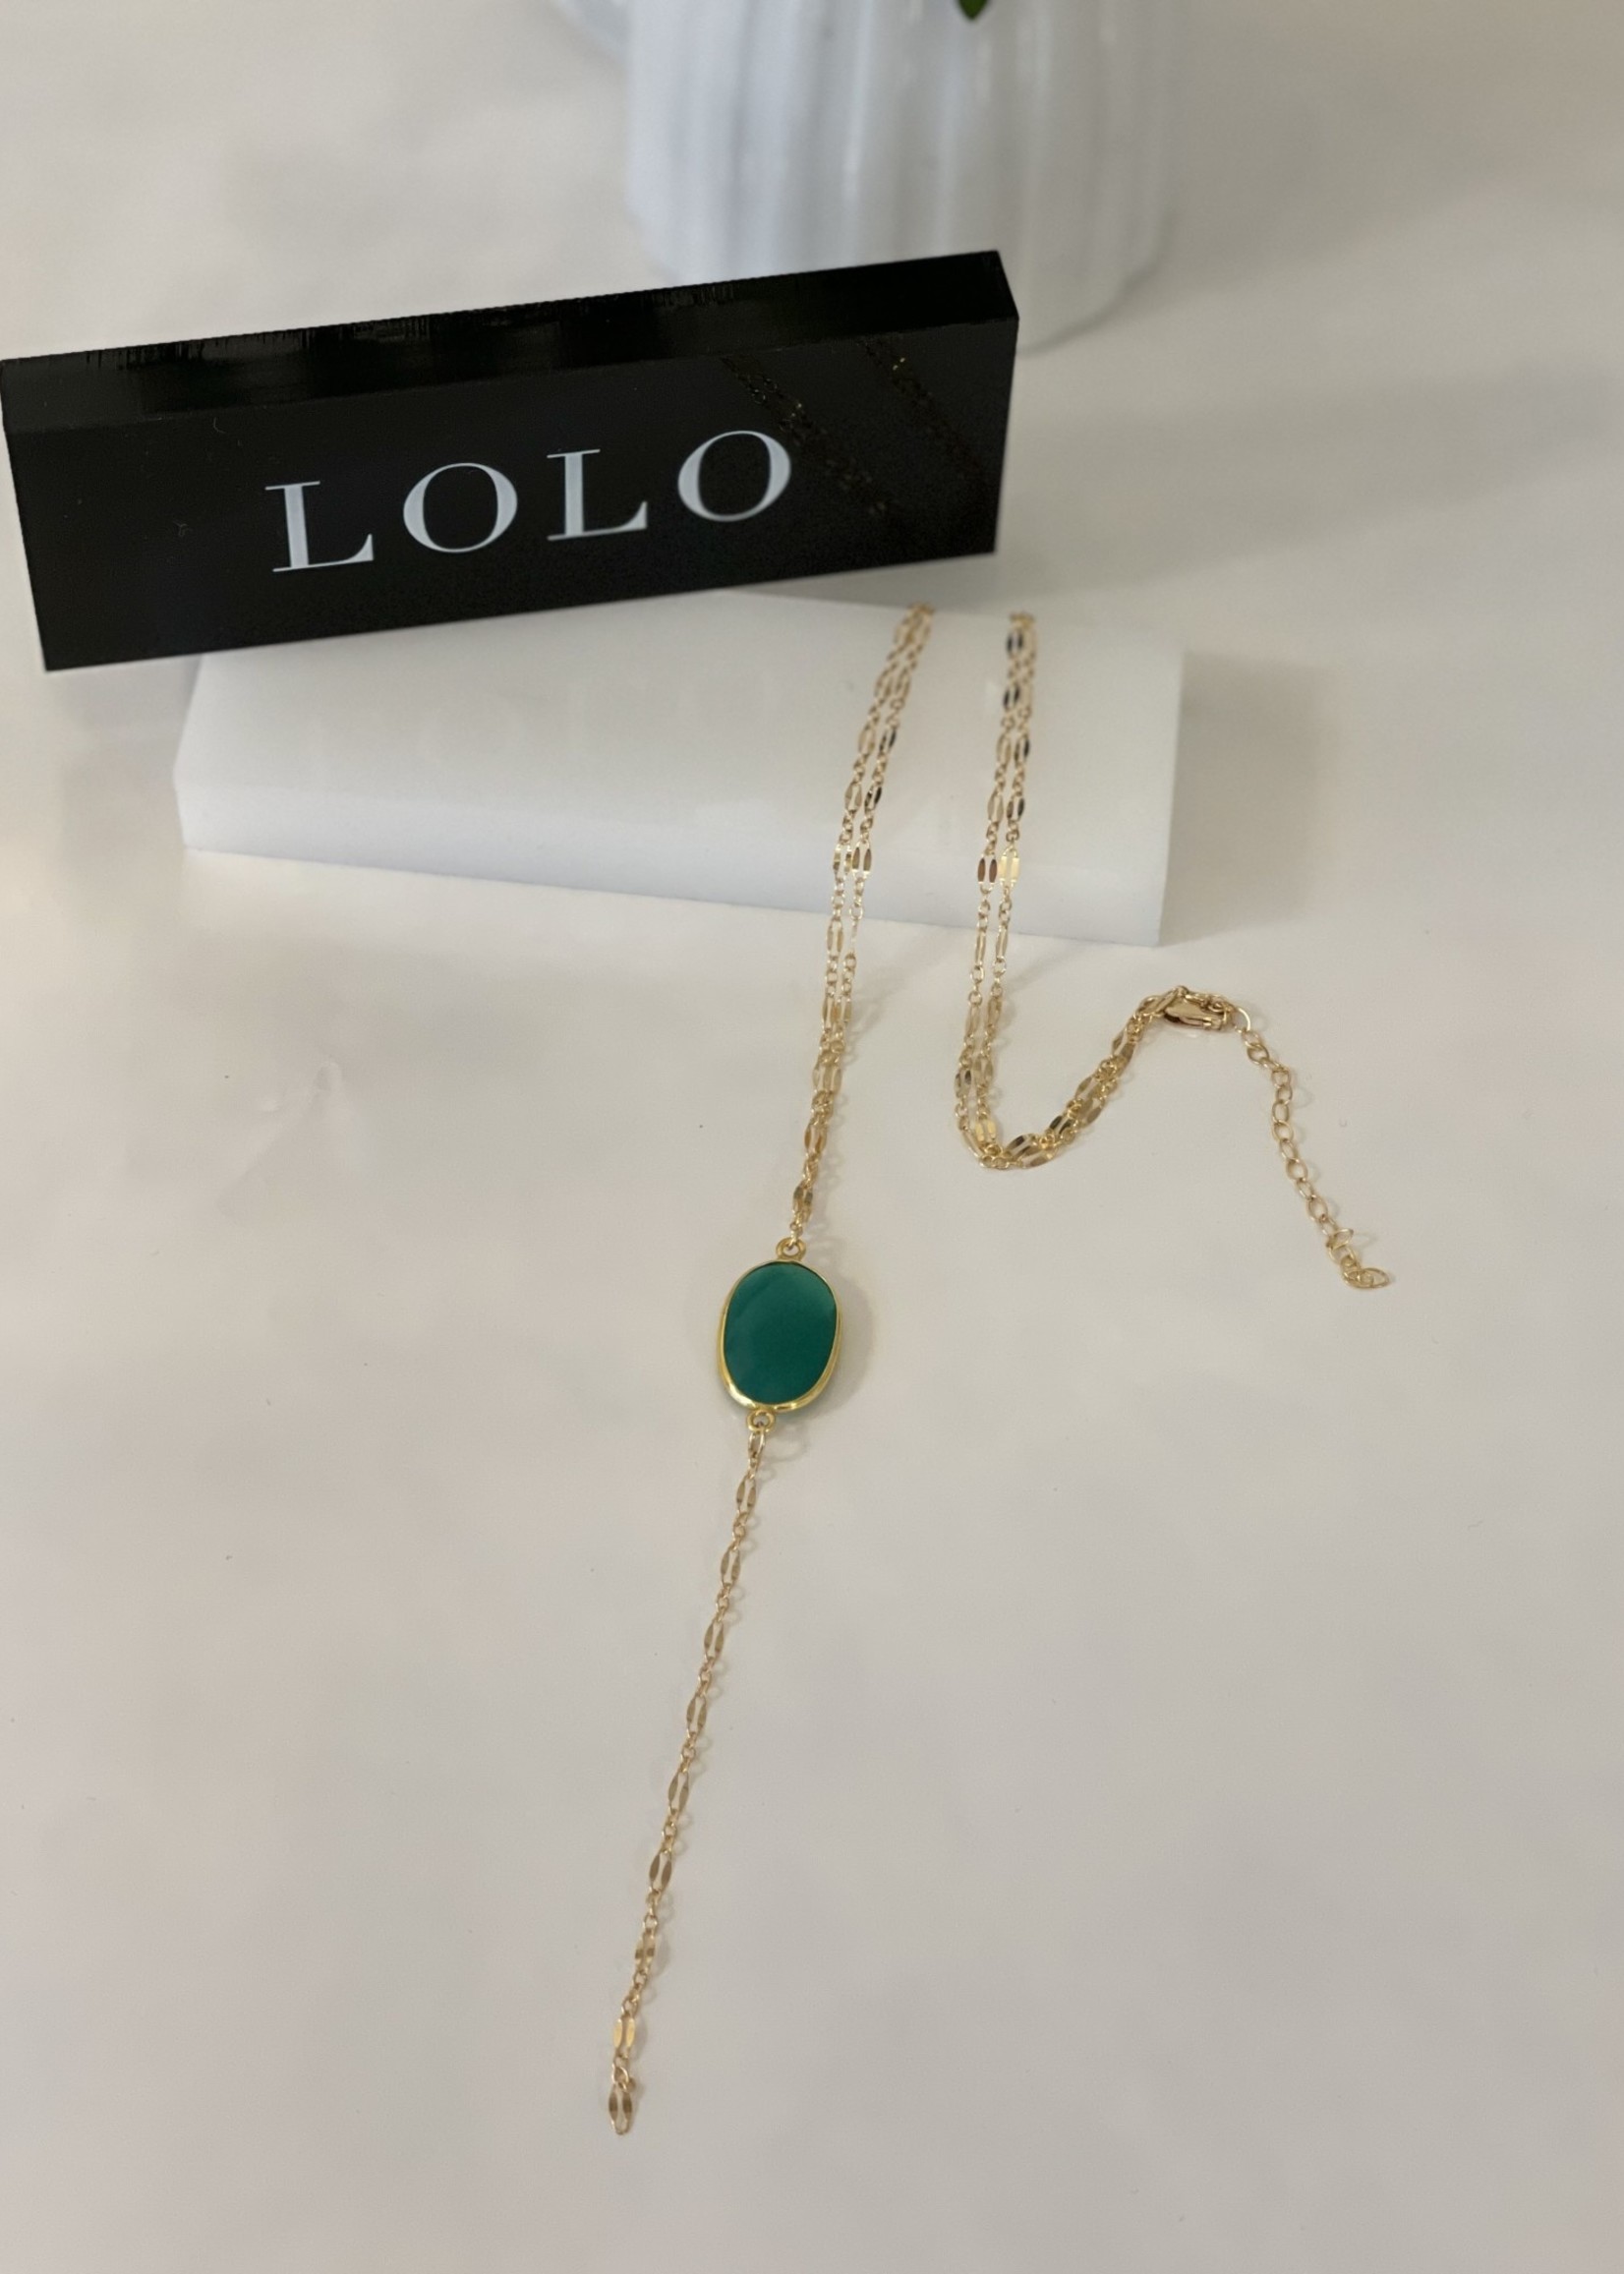 Lolo LOLO Lariat Necklace - Green Onyx